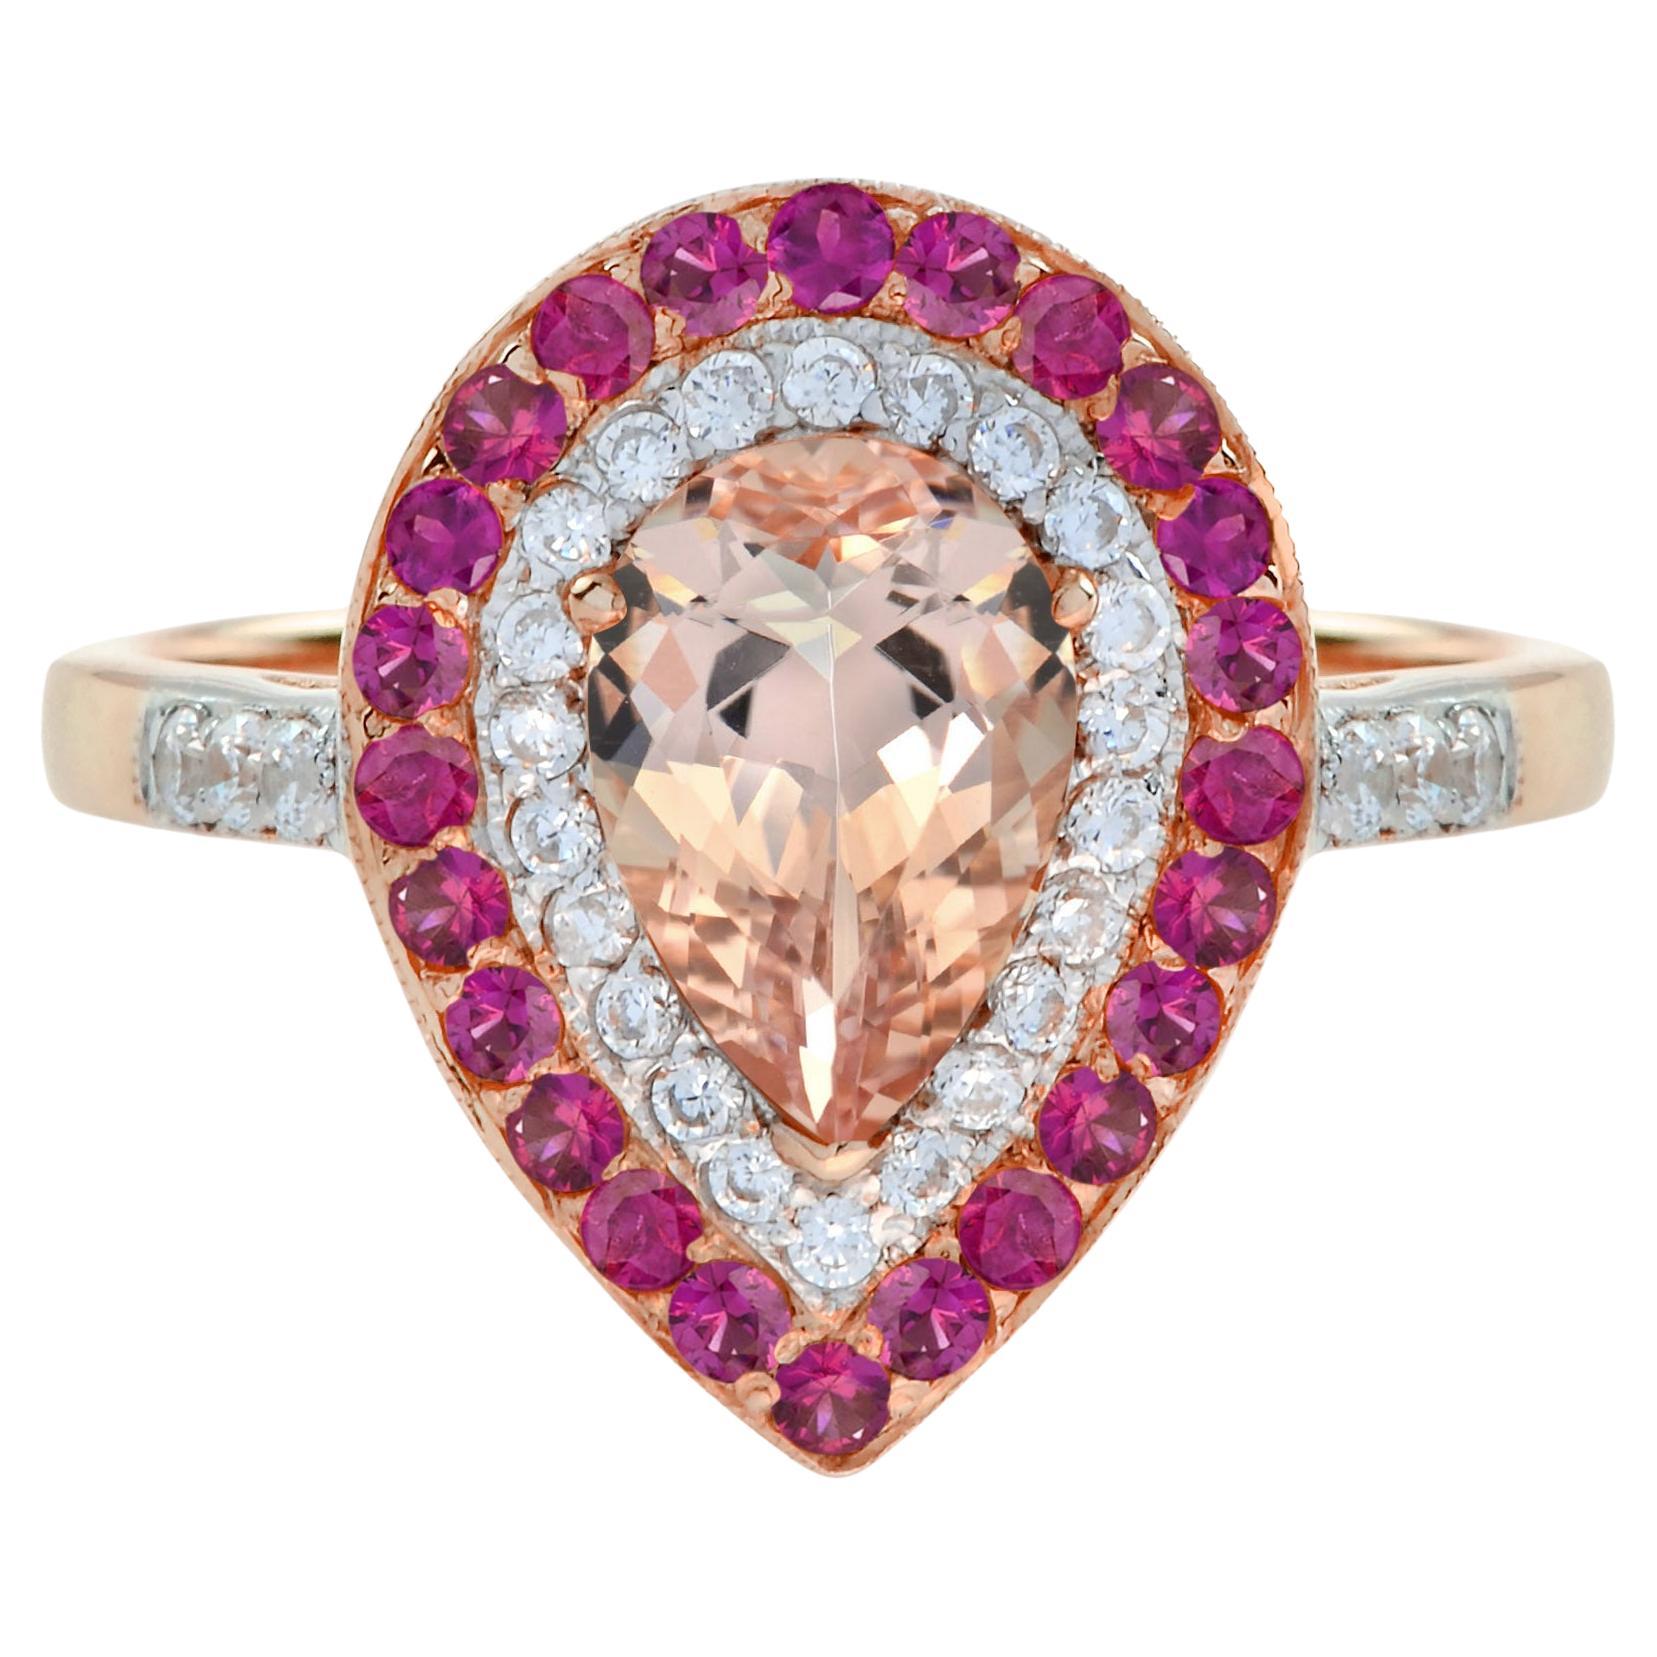 For Sale:  Morganite Diamond Ruby Pear Shaped Halo  Engagement Ring in 14K Rose Gold